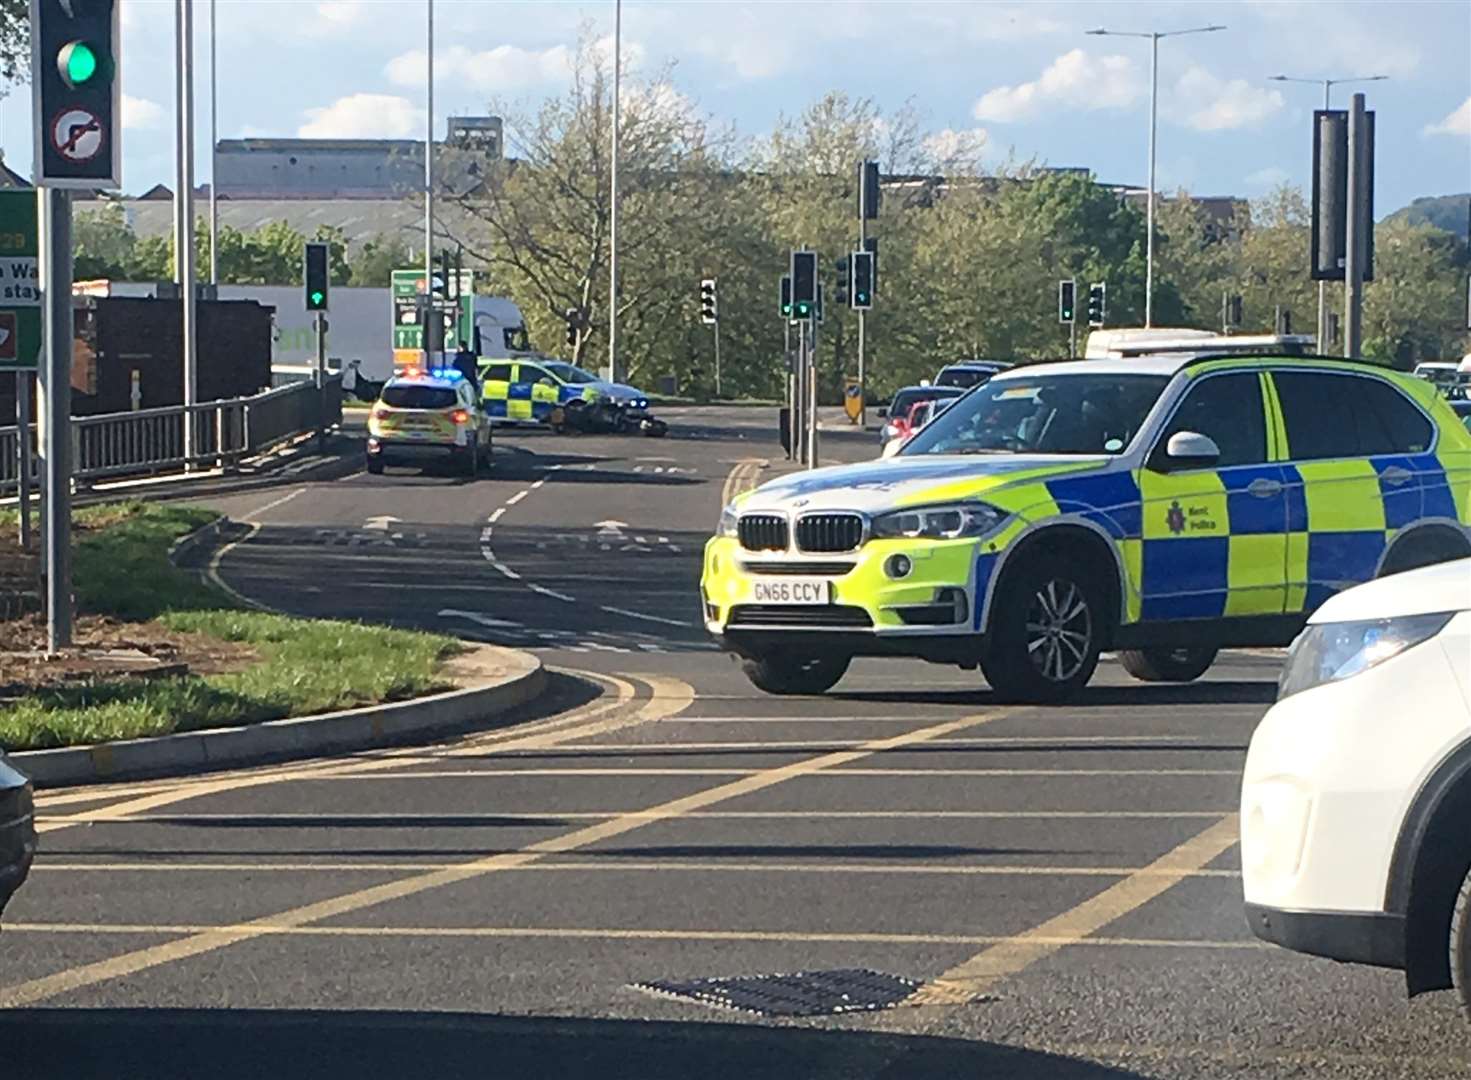 Police are at the scene in Fairmeadow, Maidstone